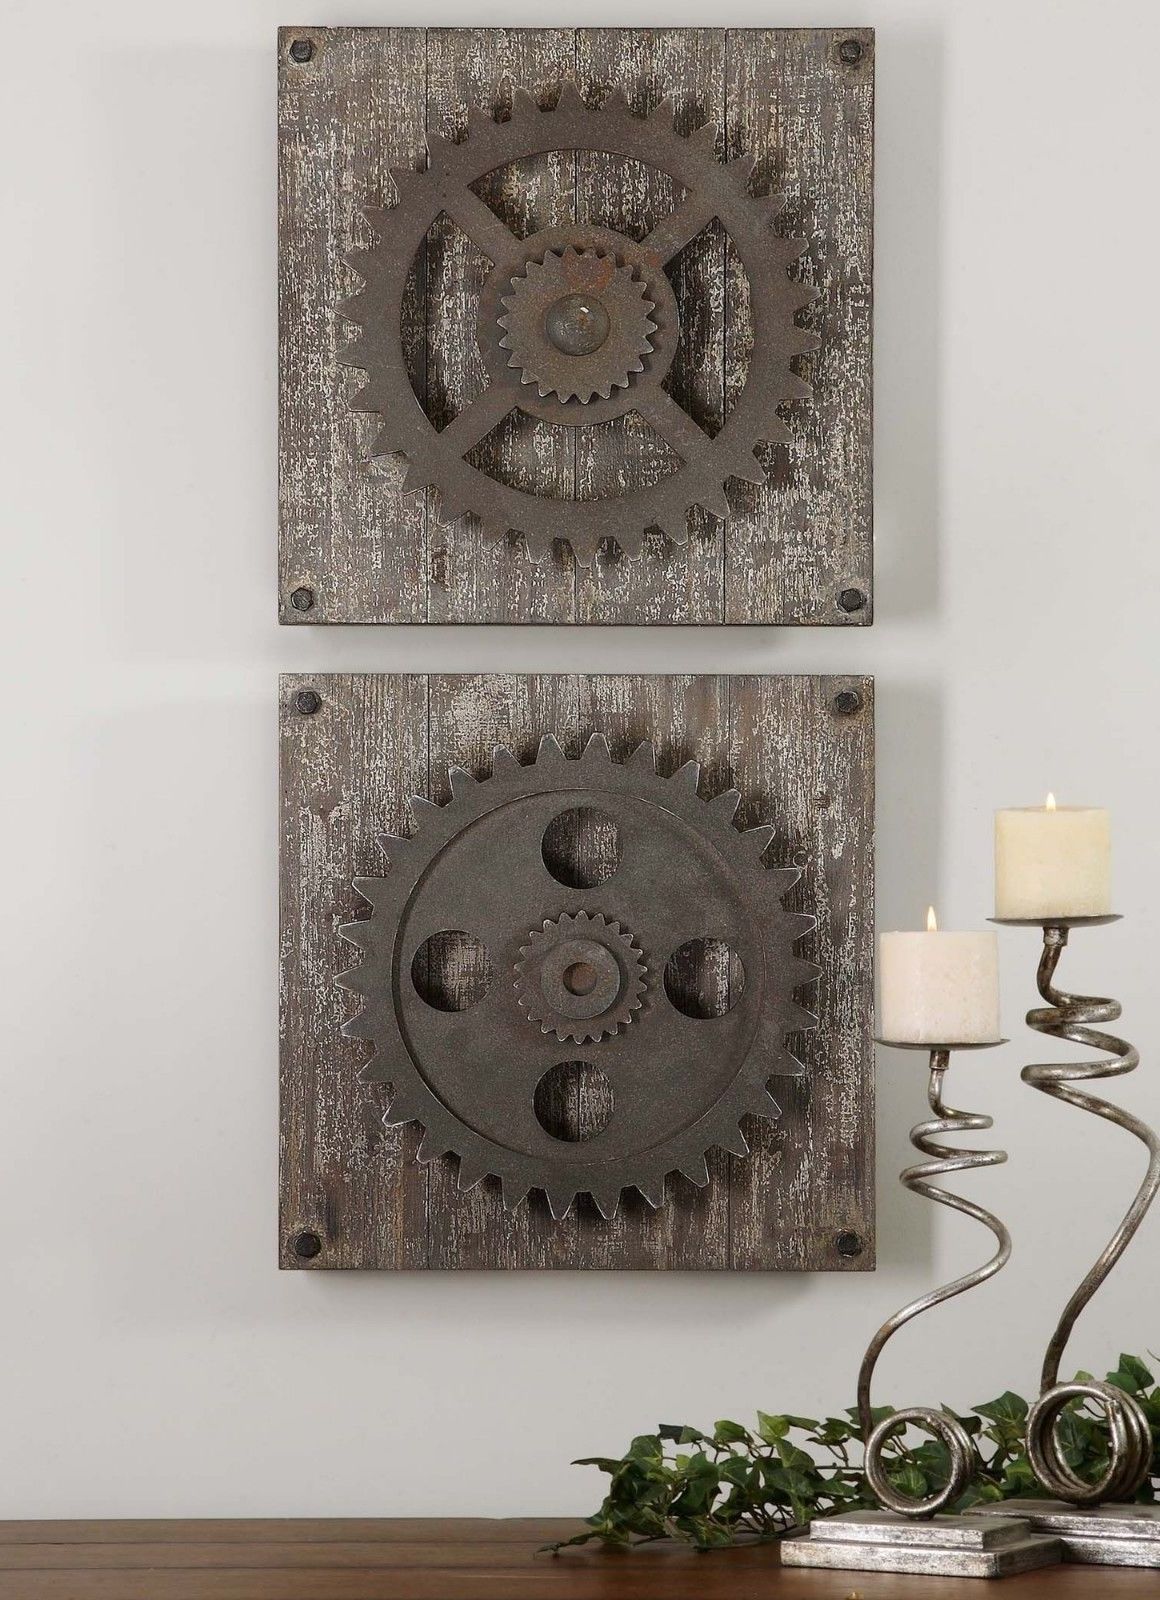 Latest Urban Industrial Loft Steampunk Decor Rusty Gears Cogs 3d Wall Art Pertaining To Vintage Industrial Wall Art (View 11 of 15)